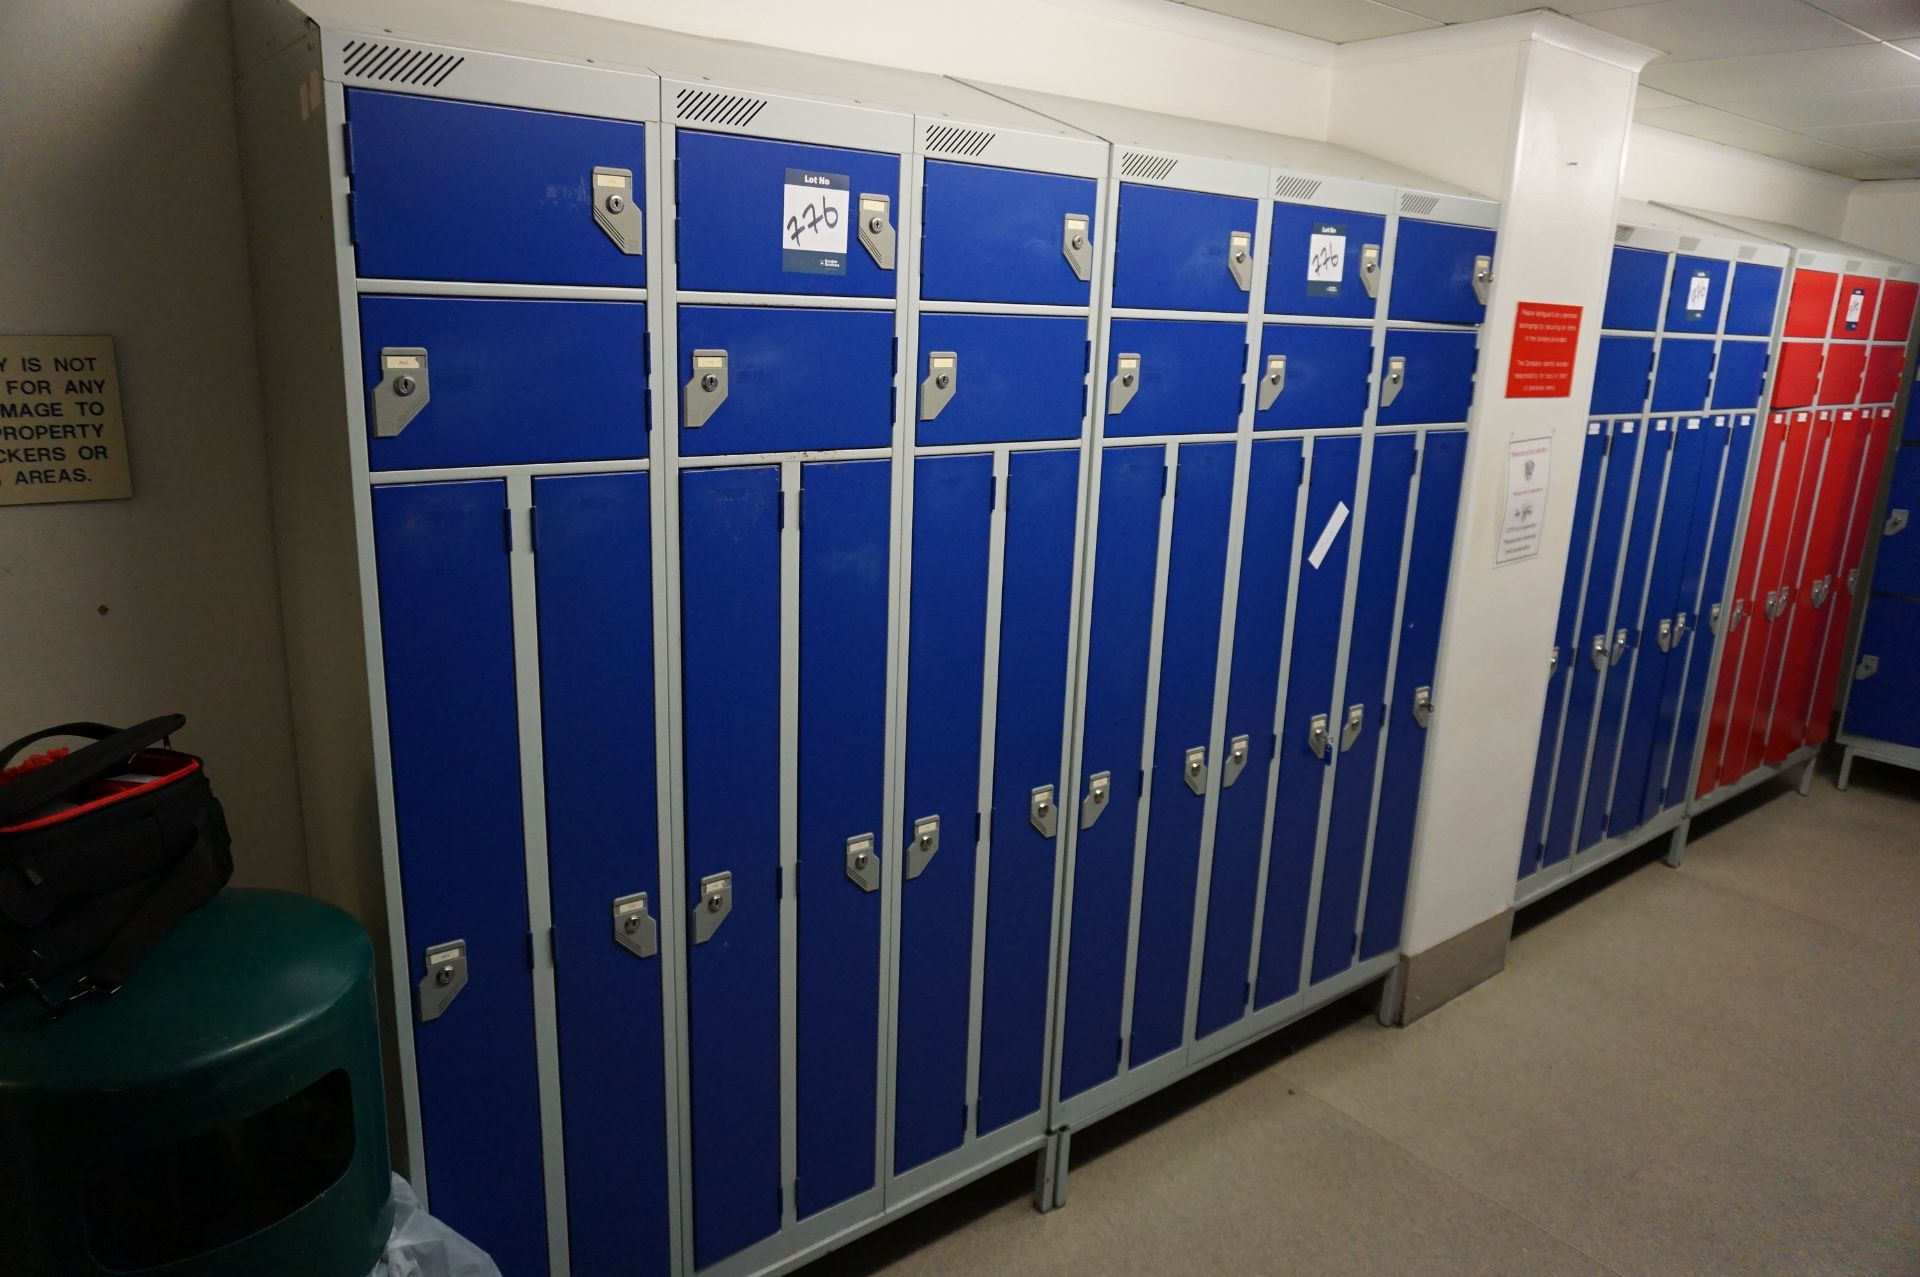 4 x 6 person shoe and coat storage lockers, some with/without keys, as lotted